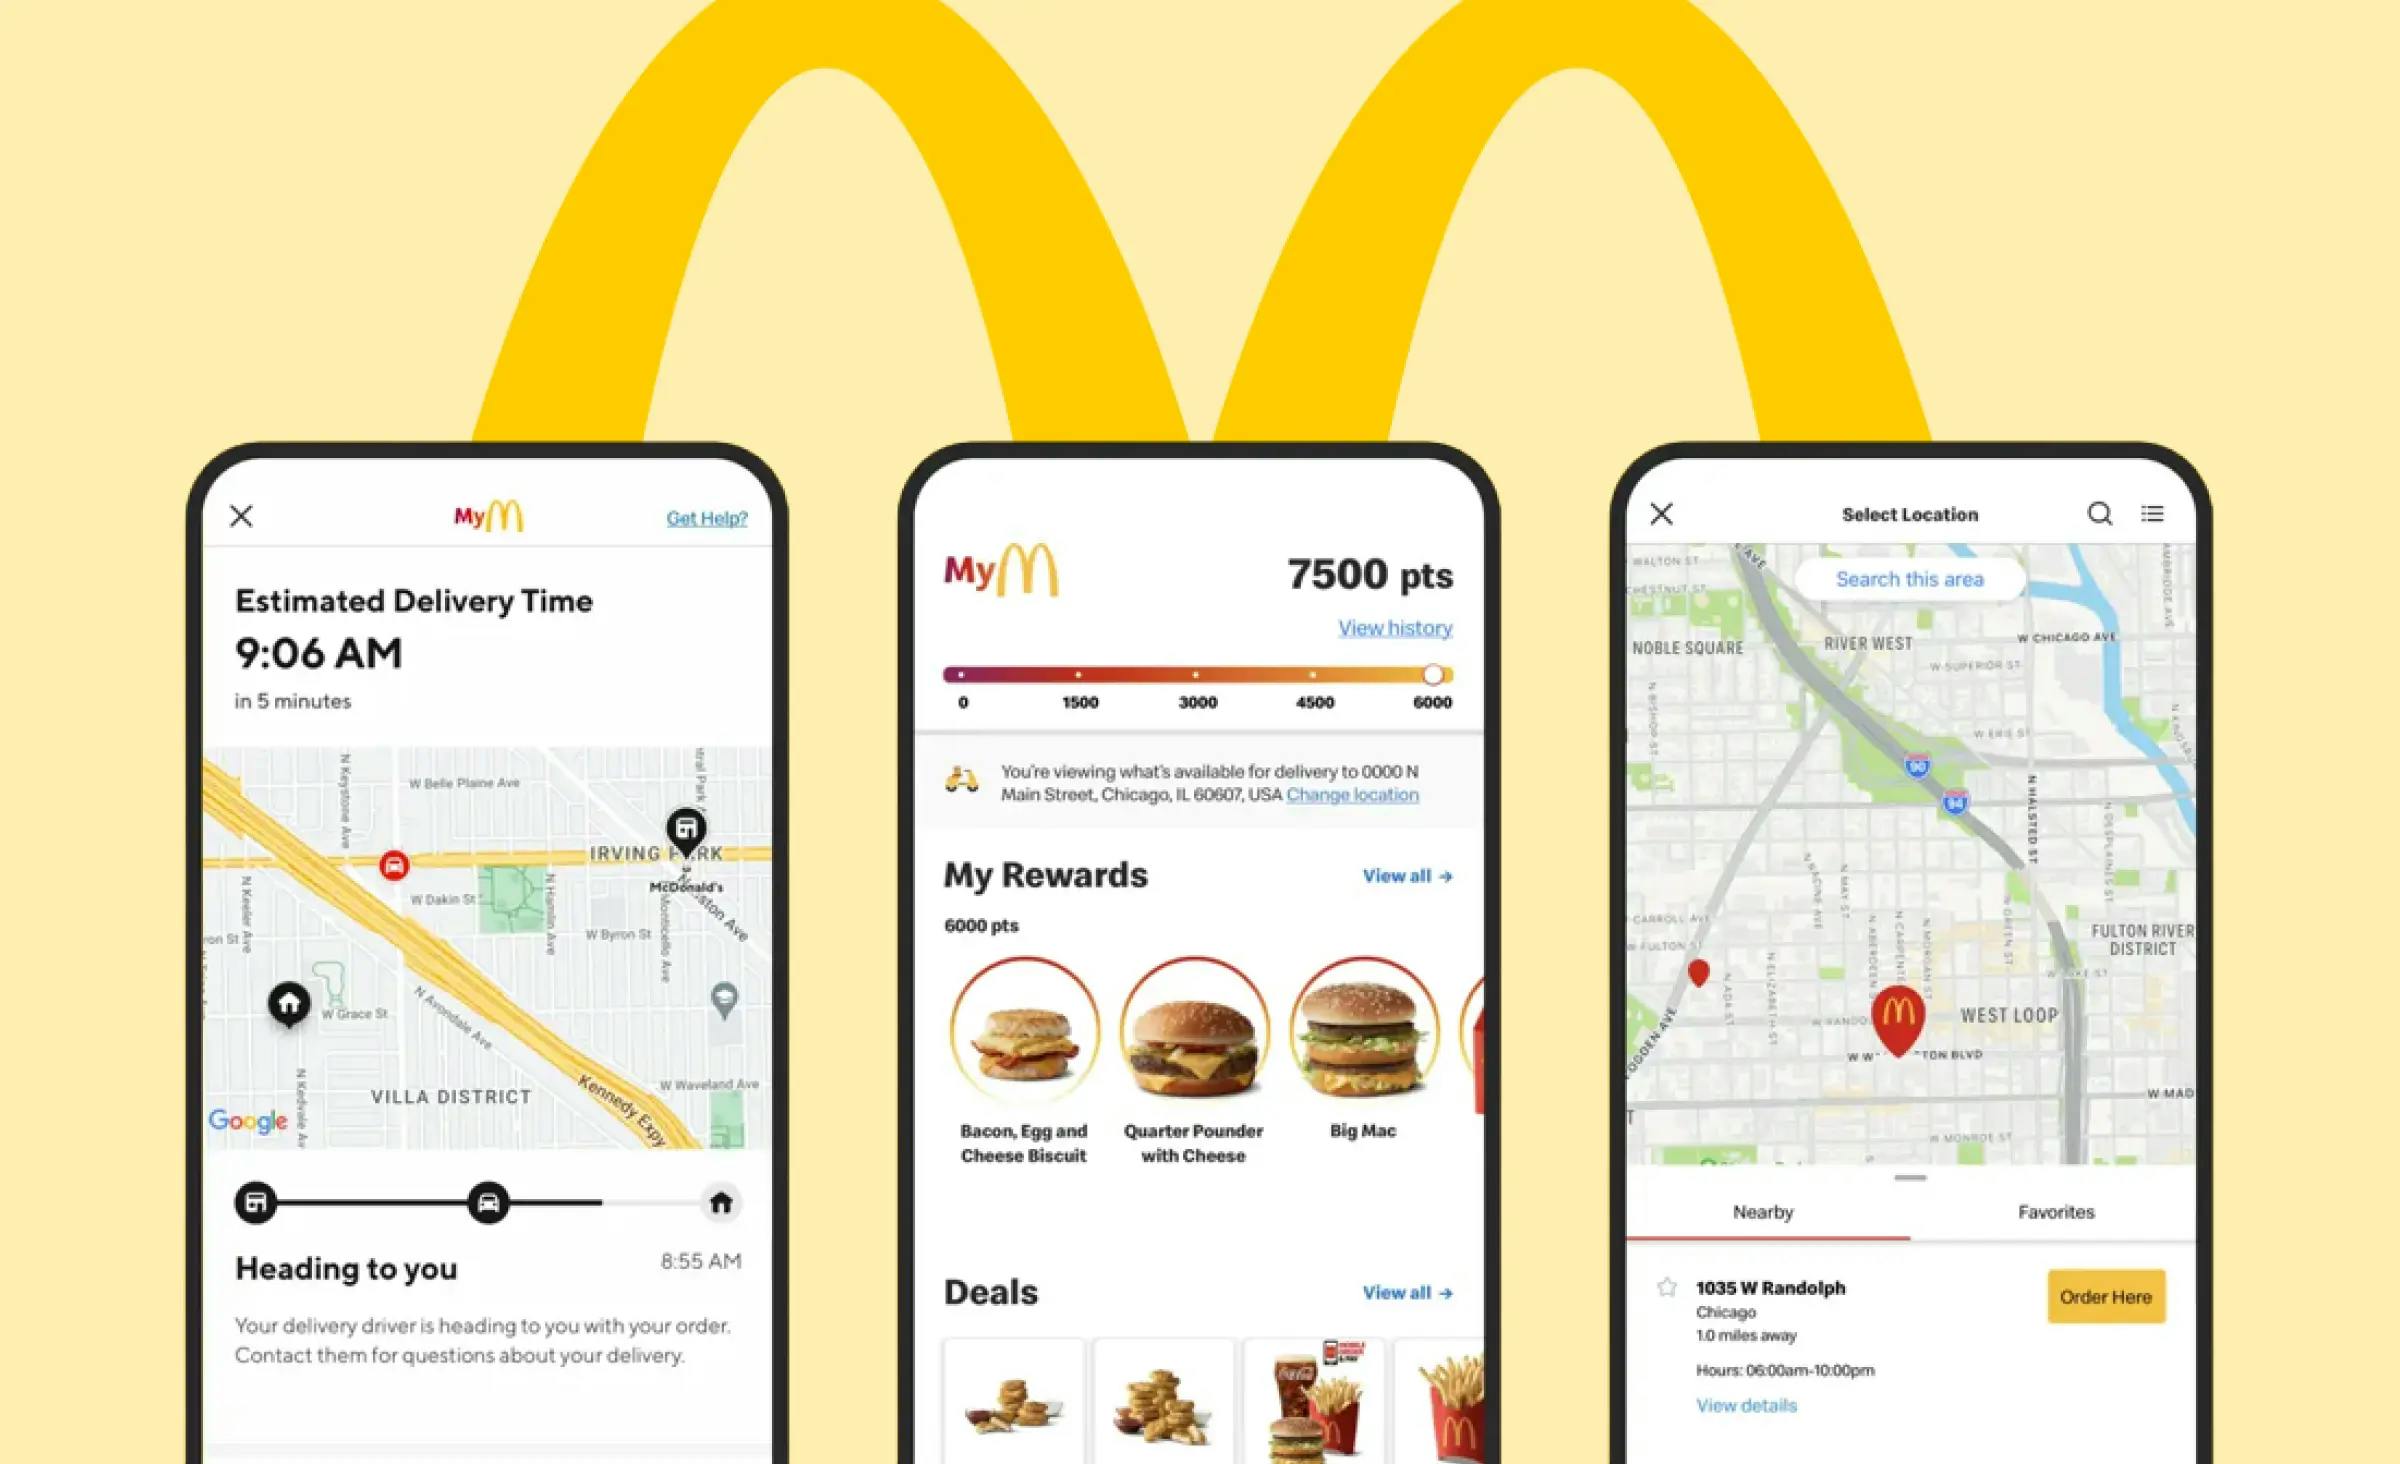 The image shows McDonald's mobile app screens: delivery progress on a map, a user profile, and a map with the nearest restaurants. The picture serves as an excellent example of restaurant-to-consumer food delivery app development.